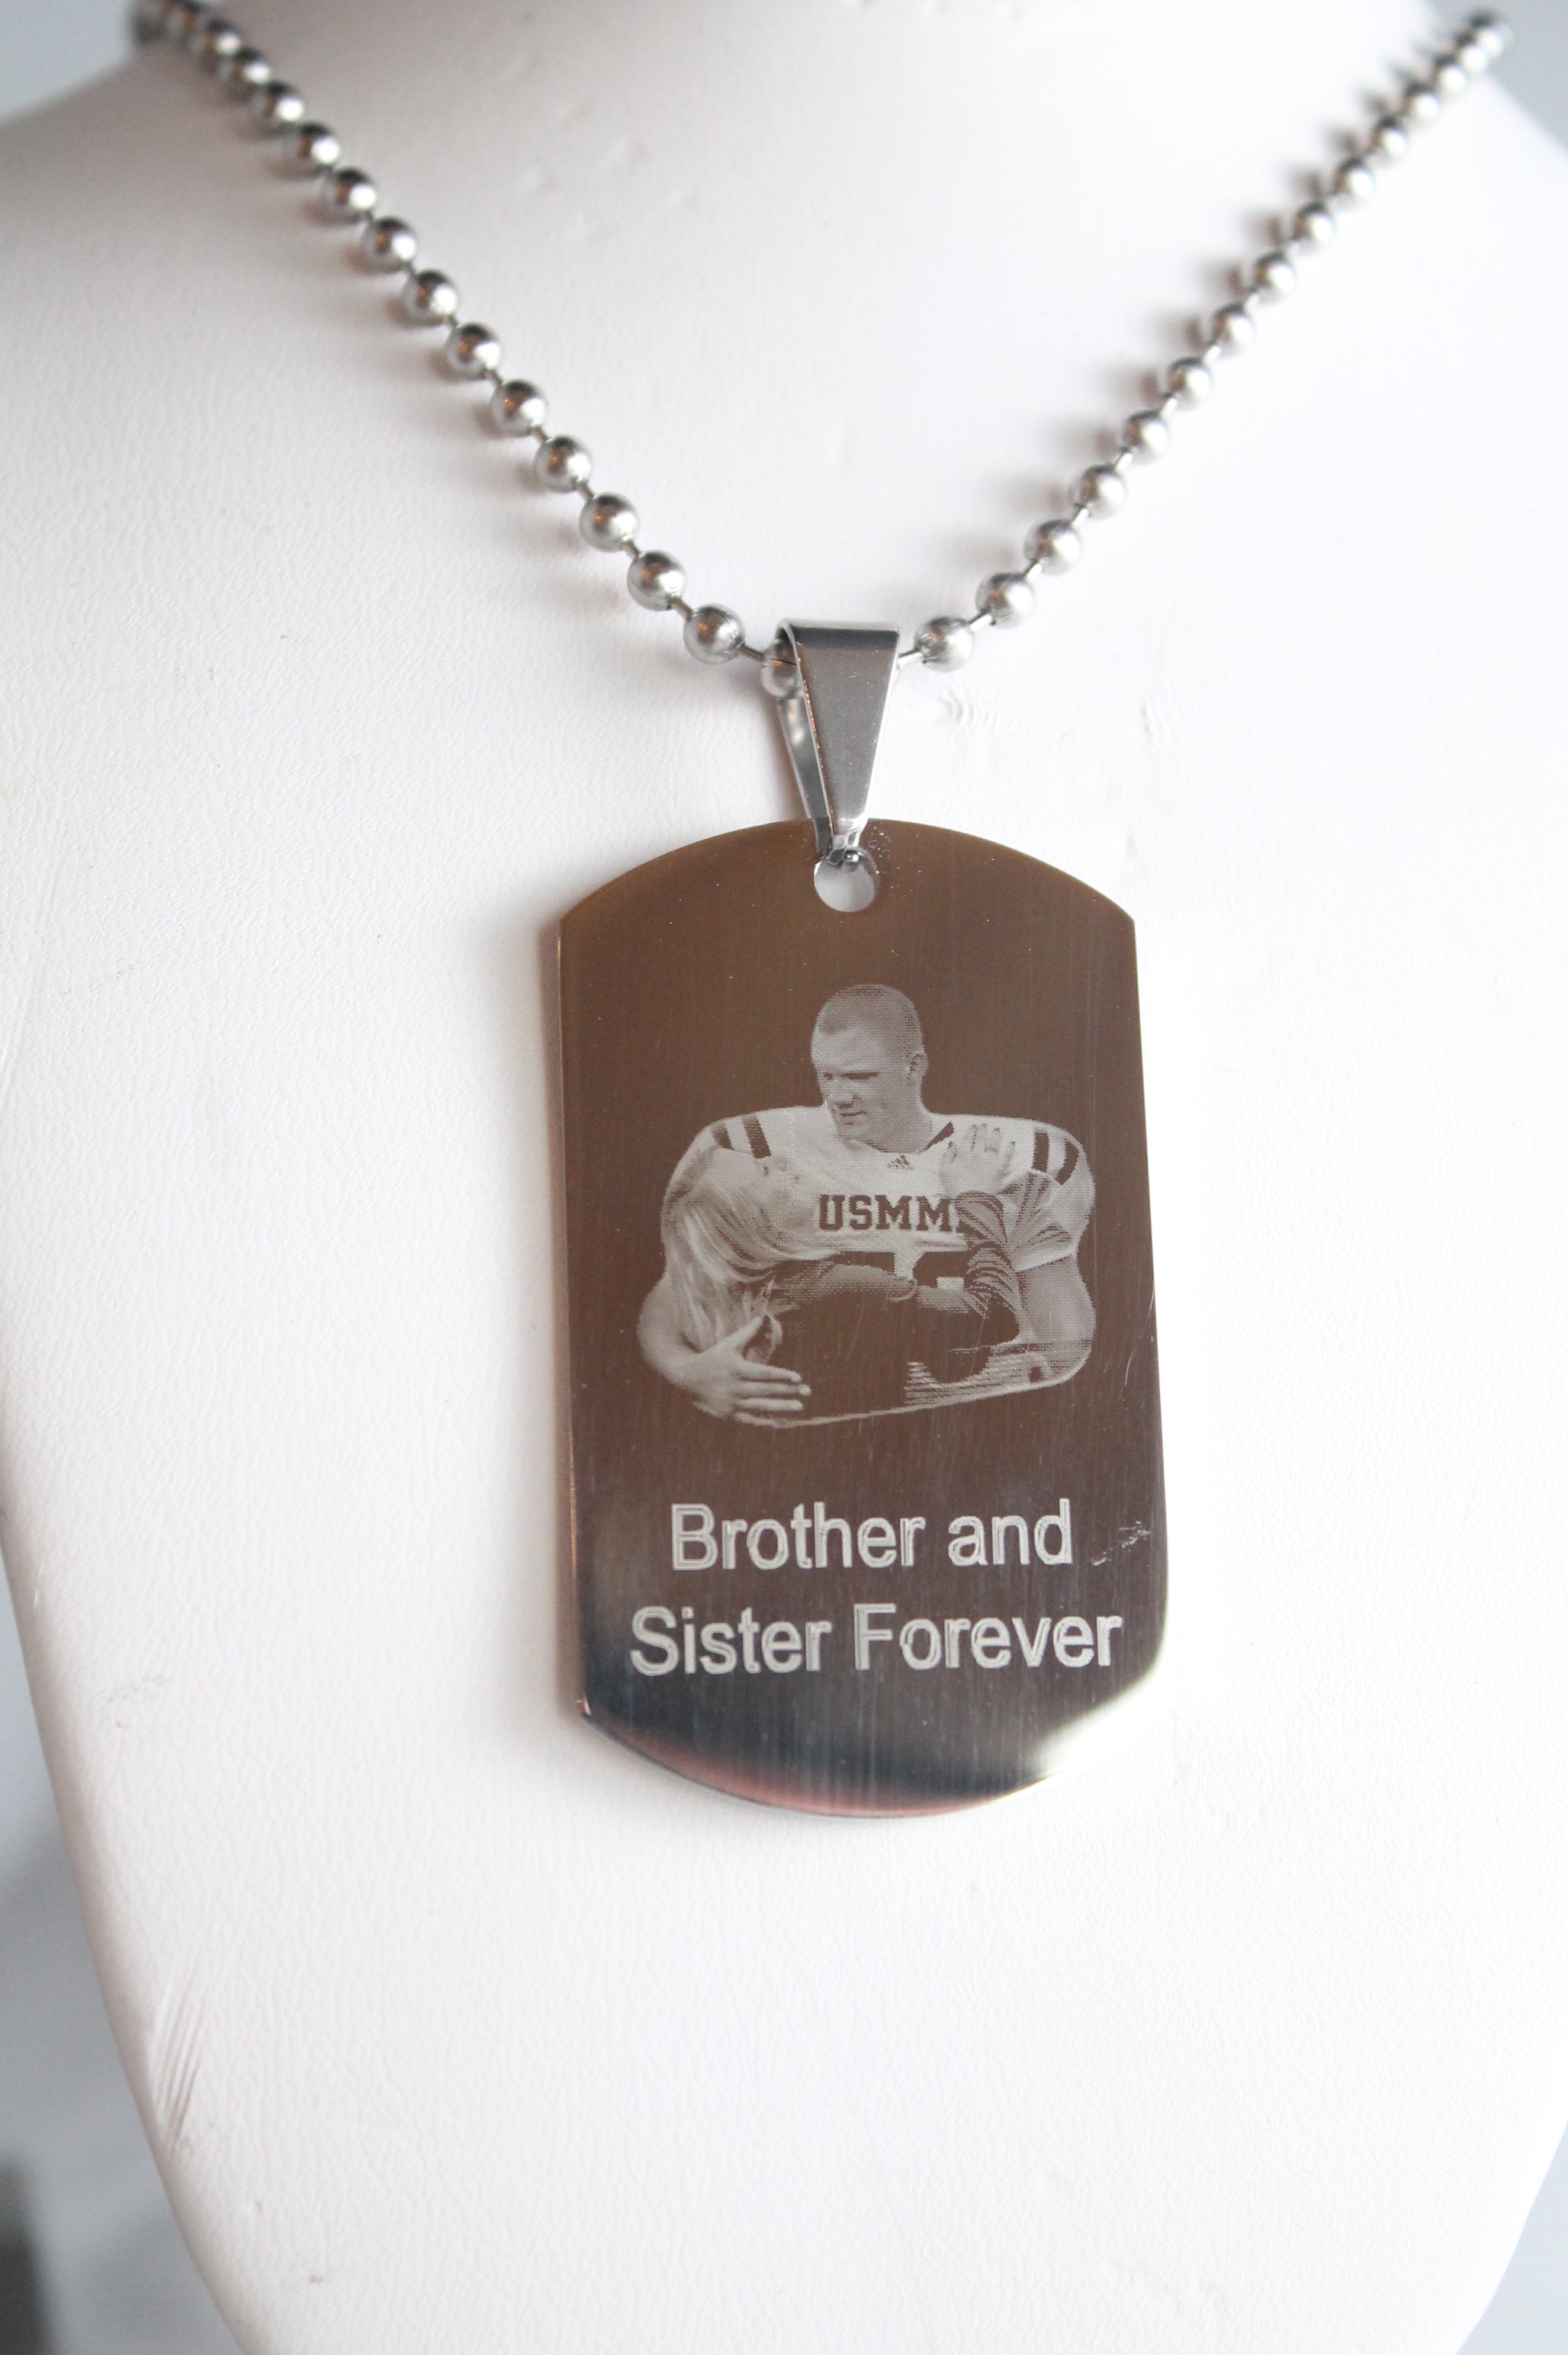 CUSTOM PERSONALIZED PICTURE STAINLESS STEEL DOG TAG AND NECKLACE ENGRAVE - Samstagsandmore